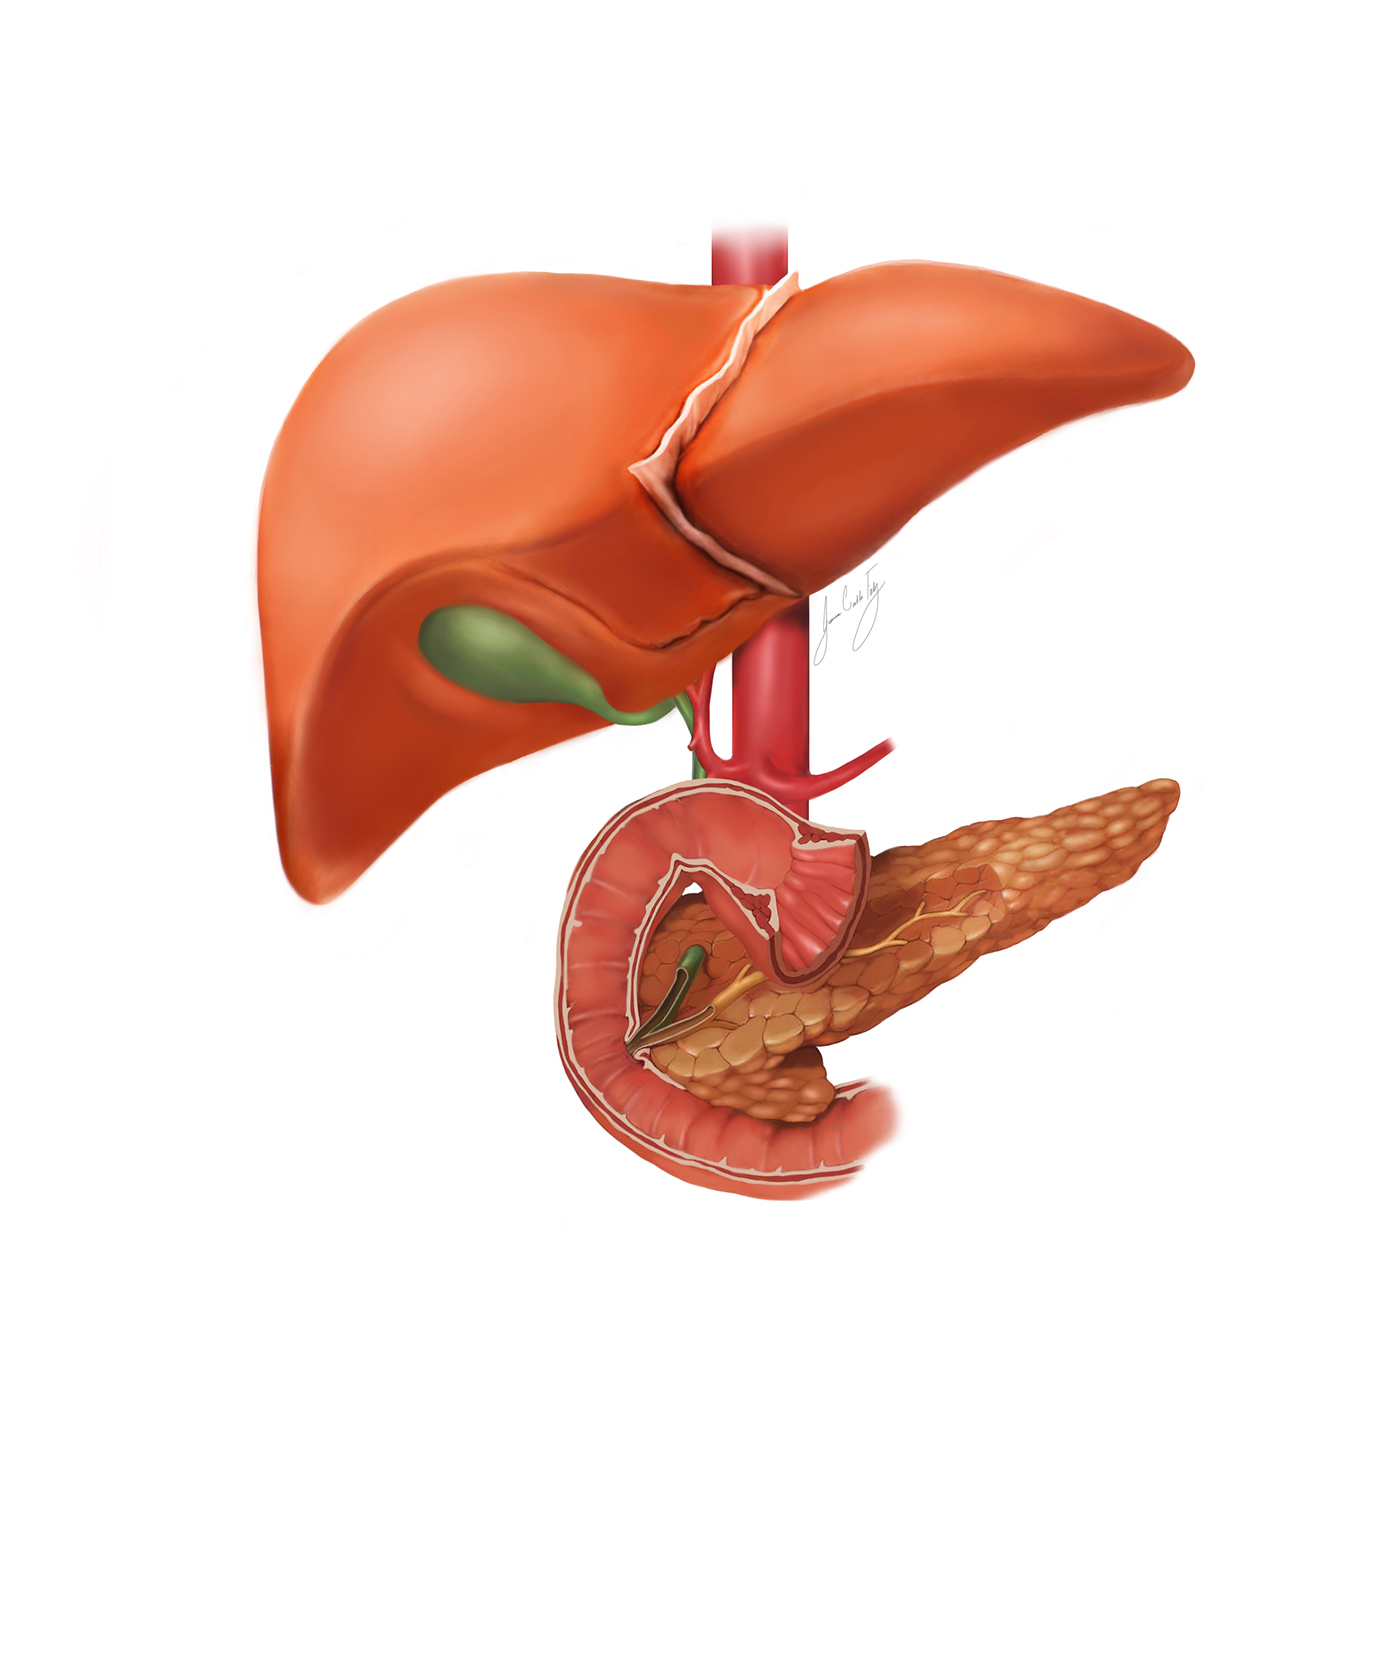 digital painting liver Pancrease Bile Duct Pancreatic Duct duodenum gall bladder